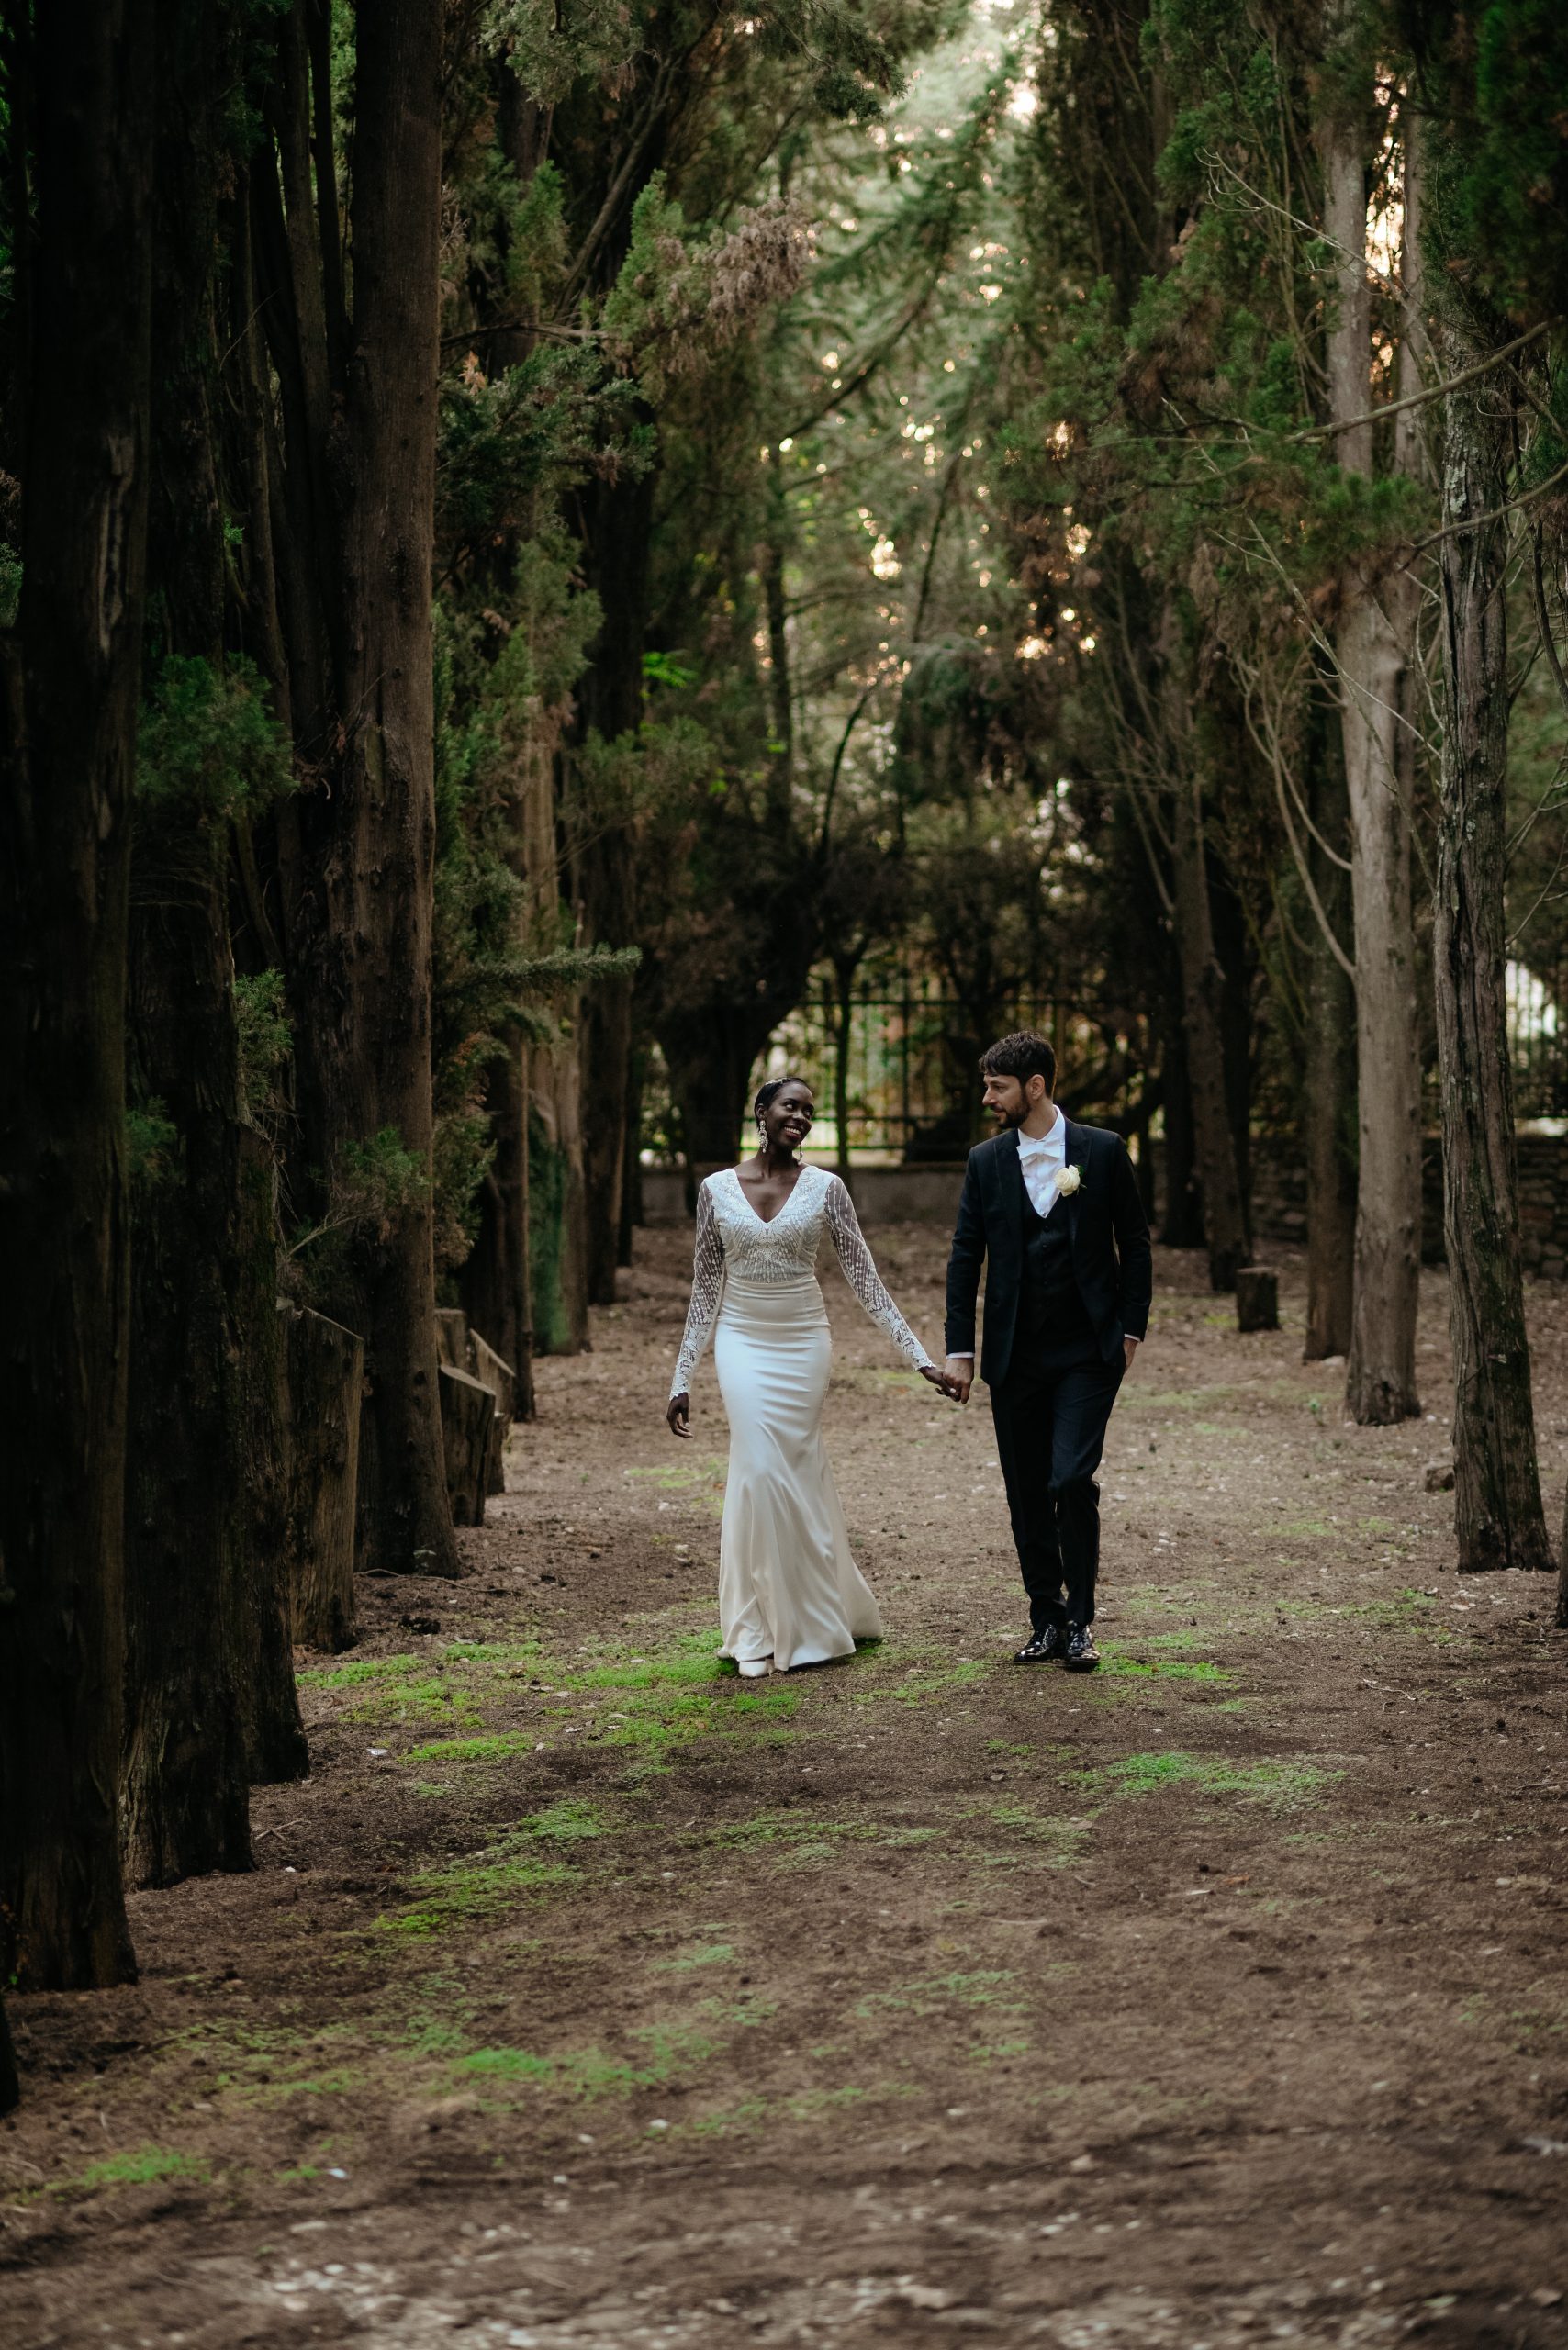 A man and woman walking through the woods holding hands.